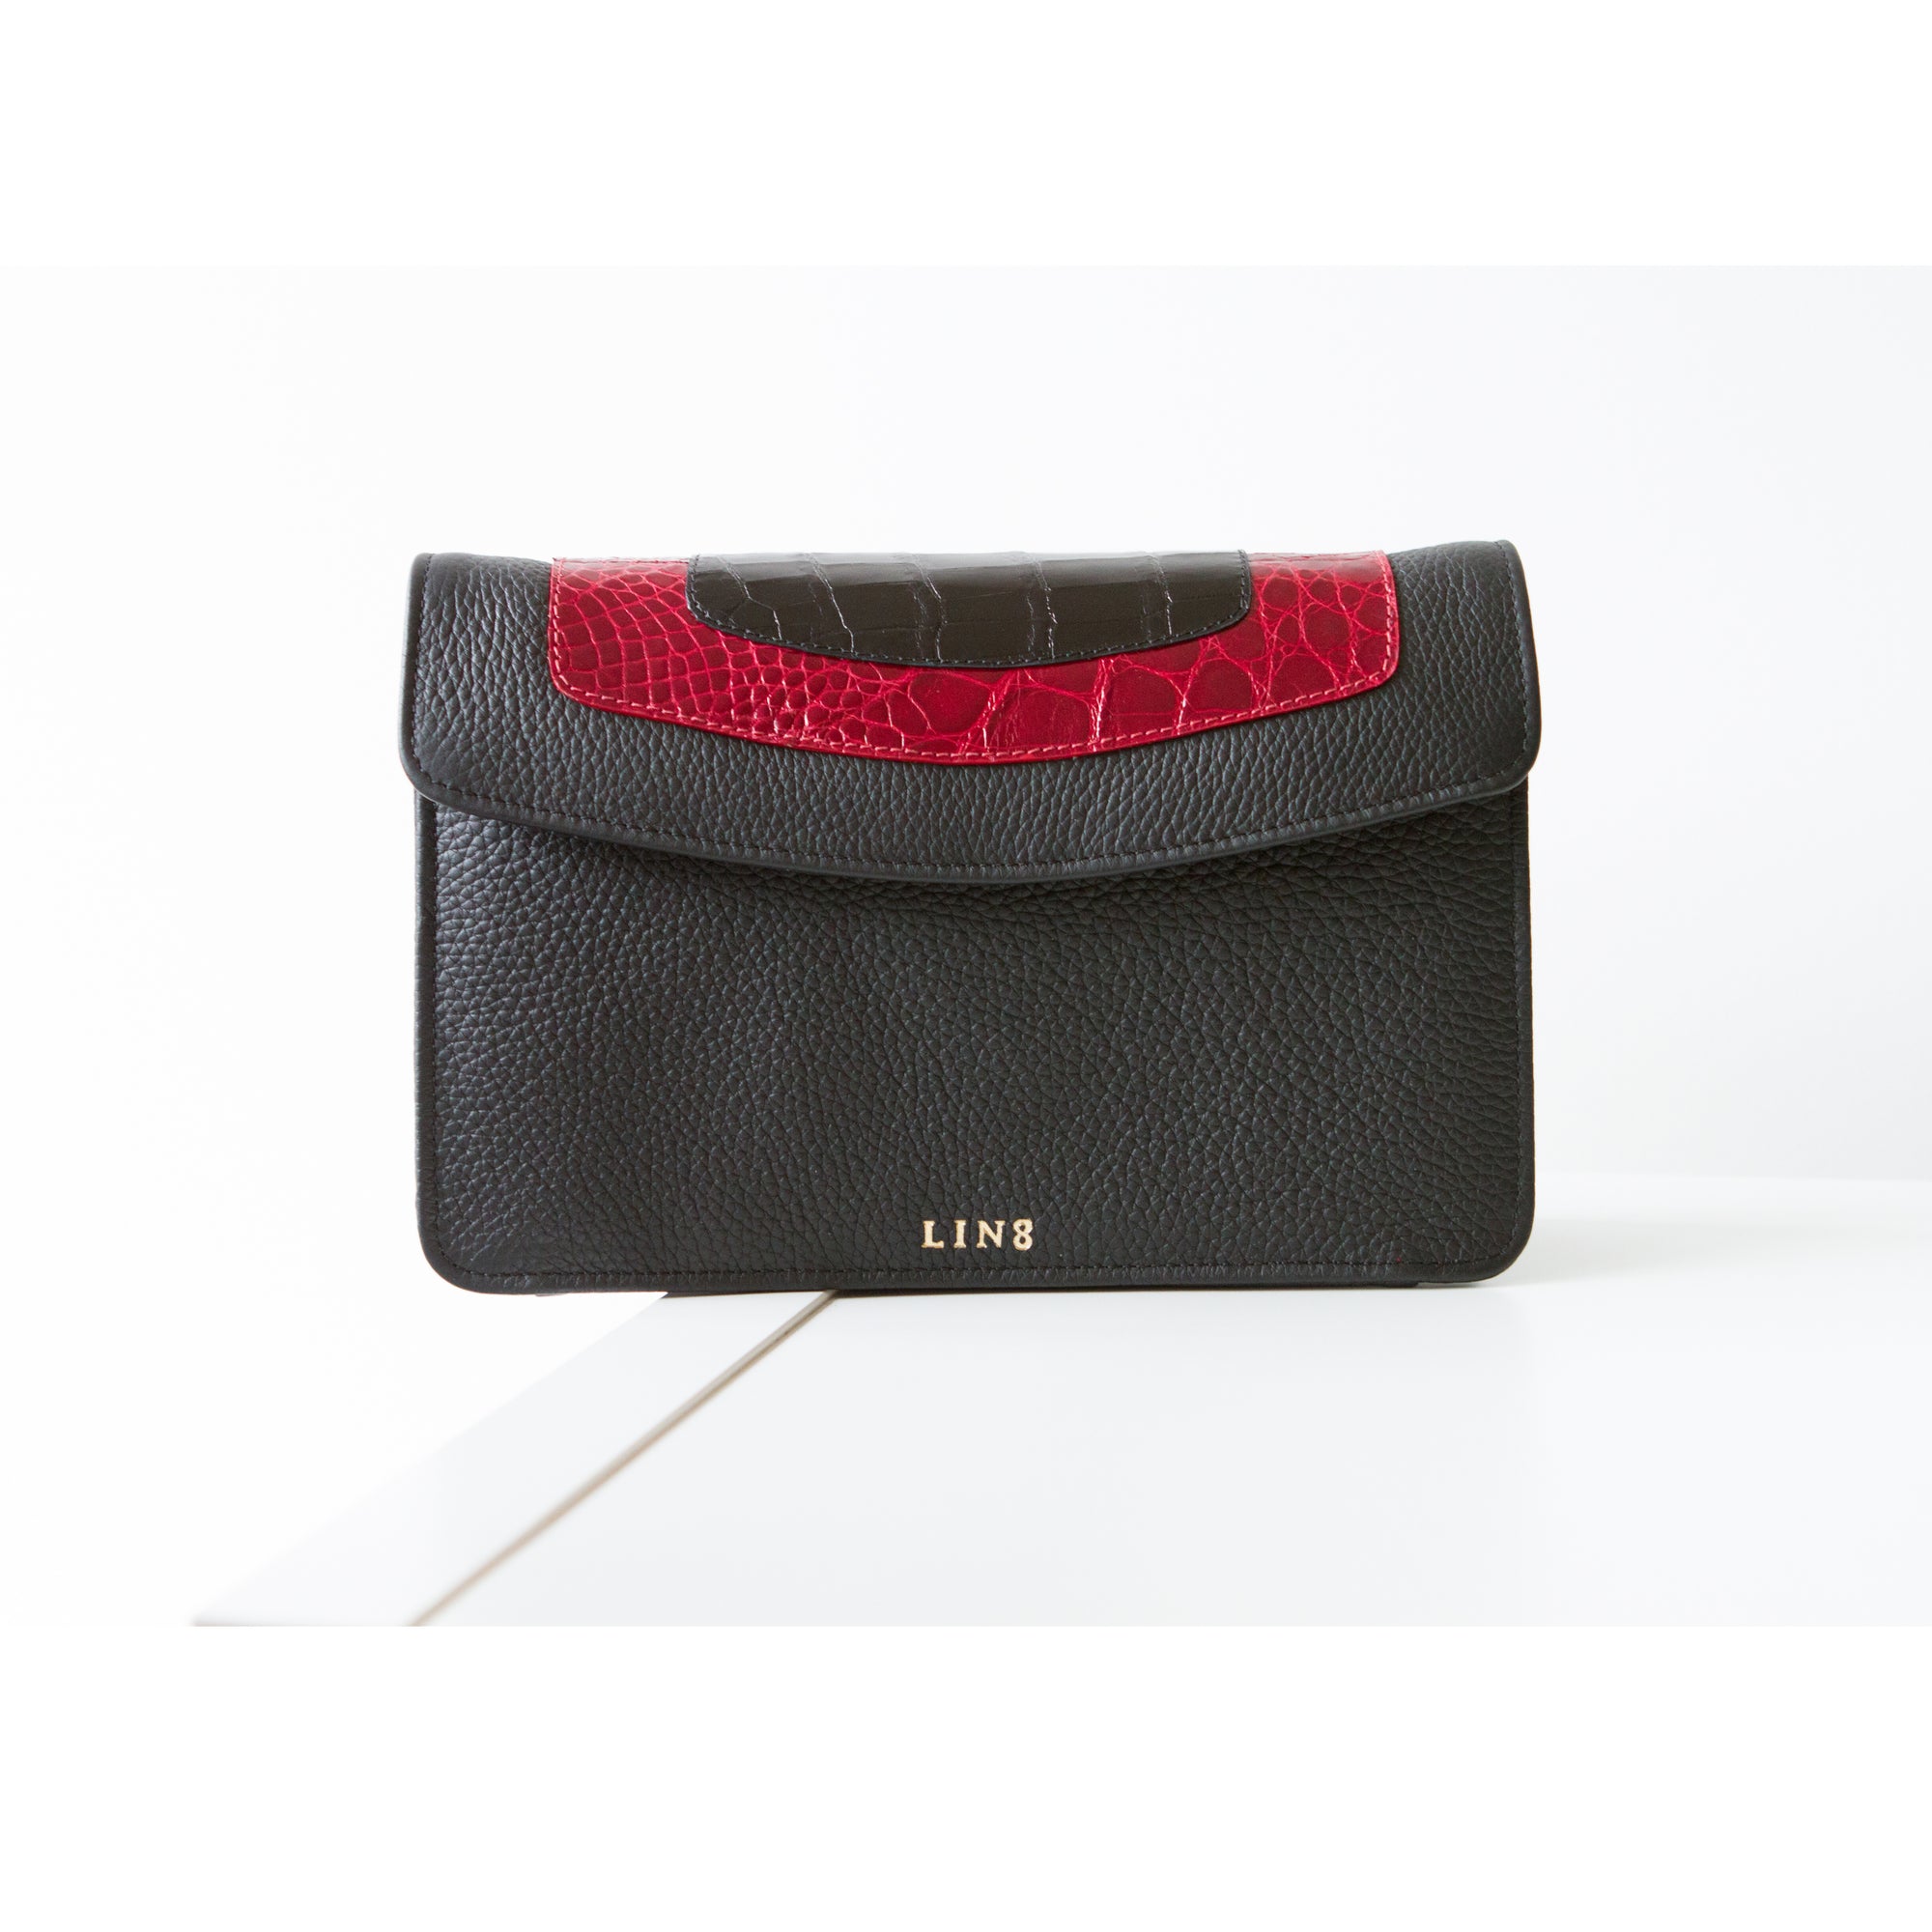 LIN8 Australia's bespoke luxury leather goods. Customise, personalise, design, create your own today by selecting chevre, crocodile, taurillon, box calf, togo leather for her/ him Valentine's day